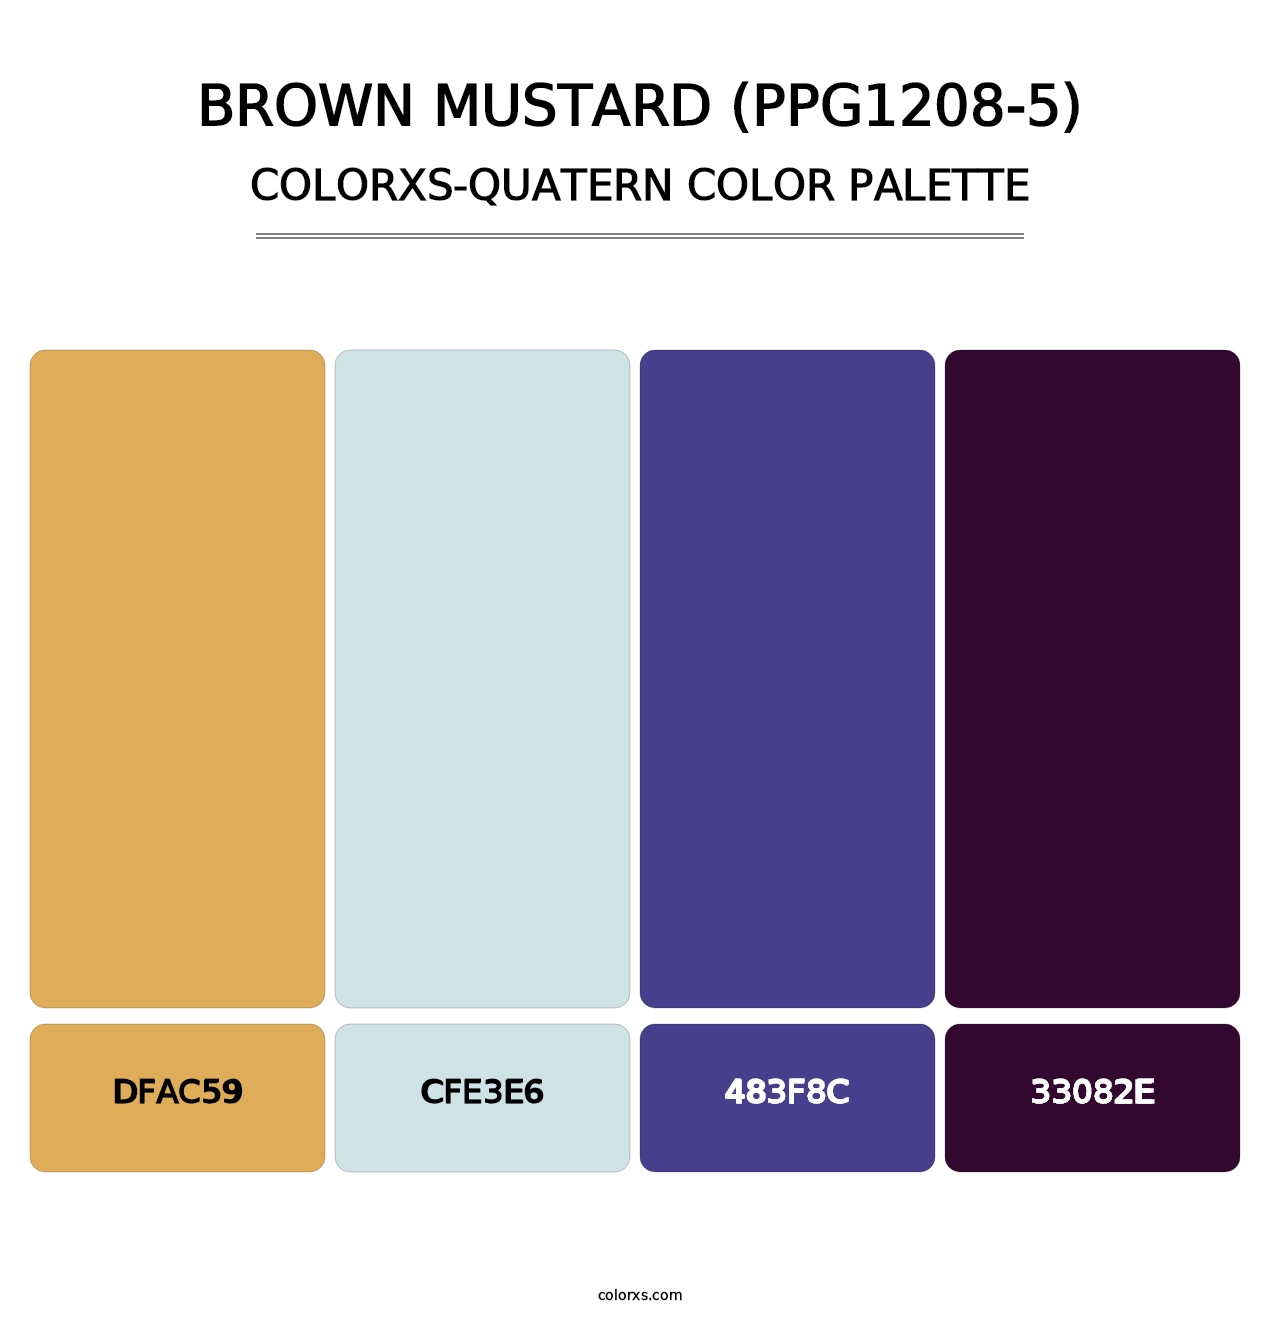 Brown Mustard (PPG1208-5) - Colorxs Quatern Palette